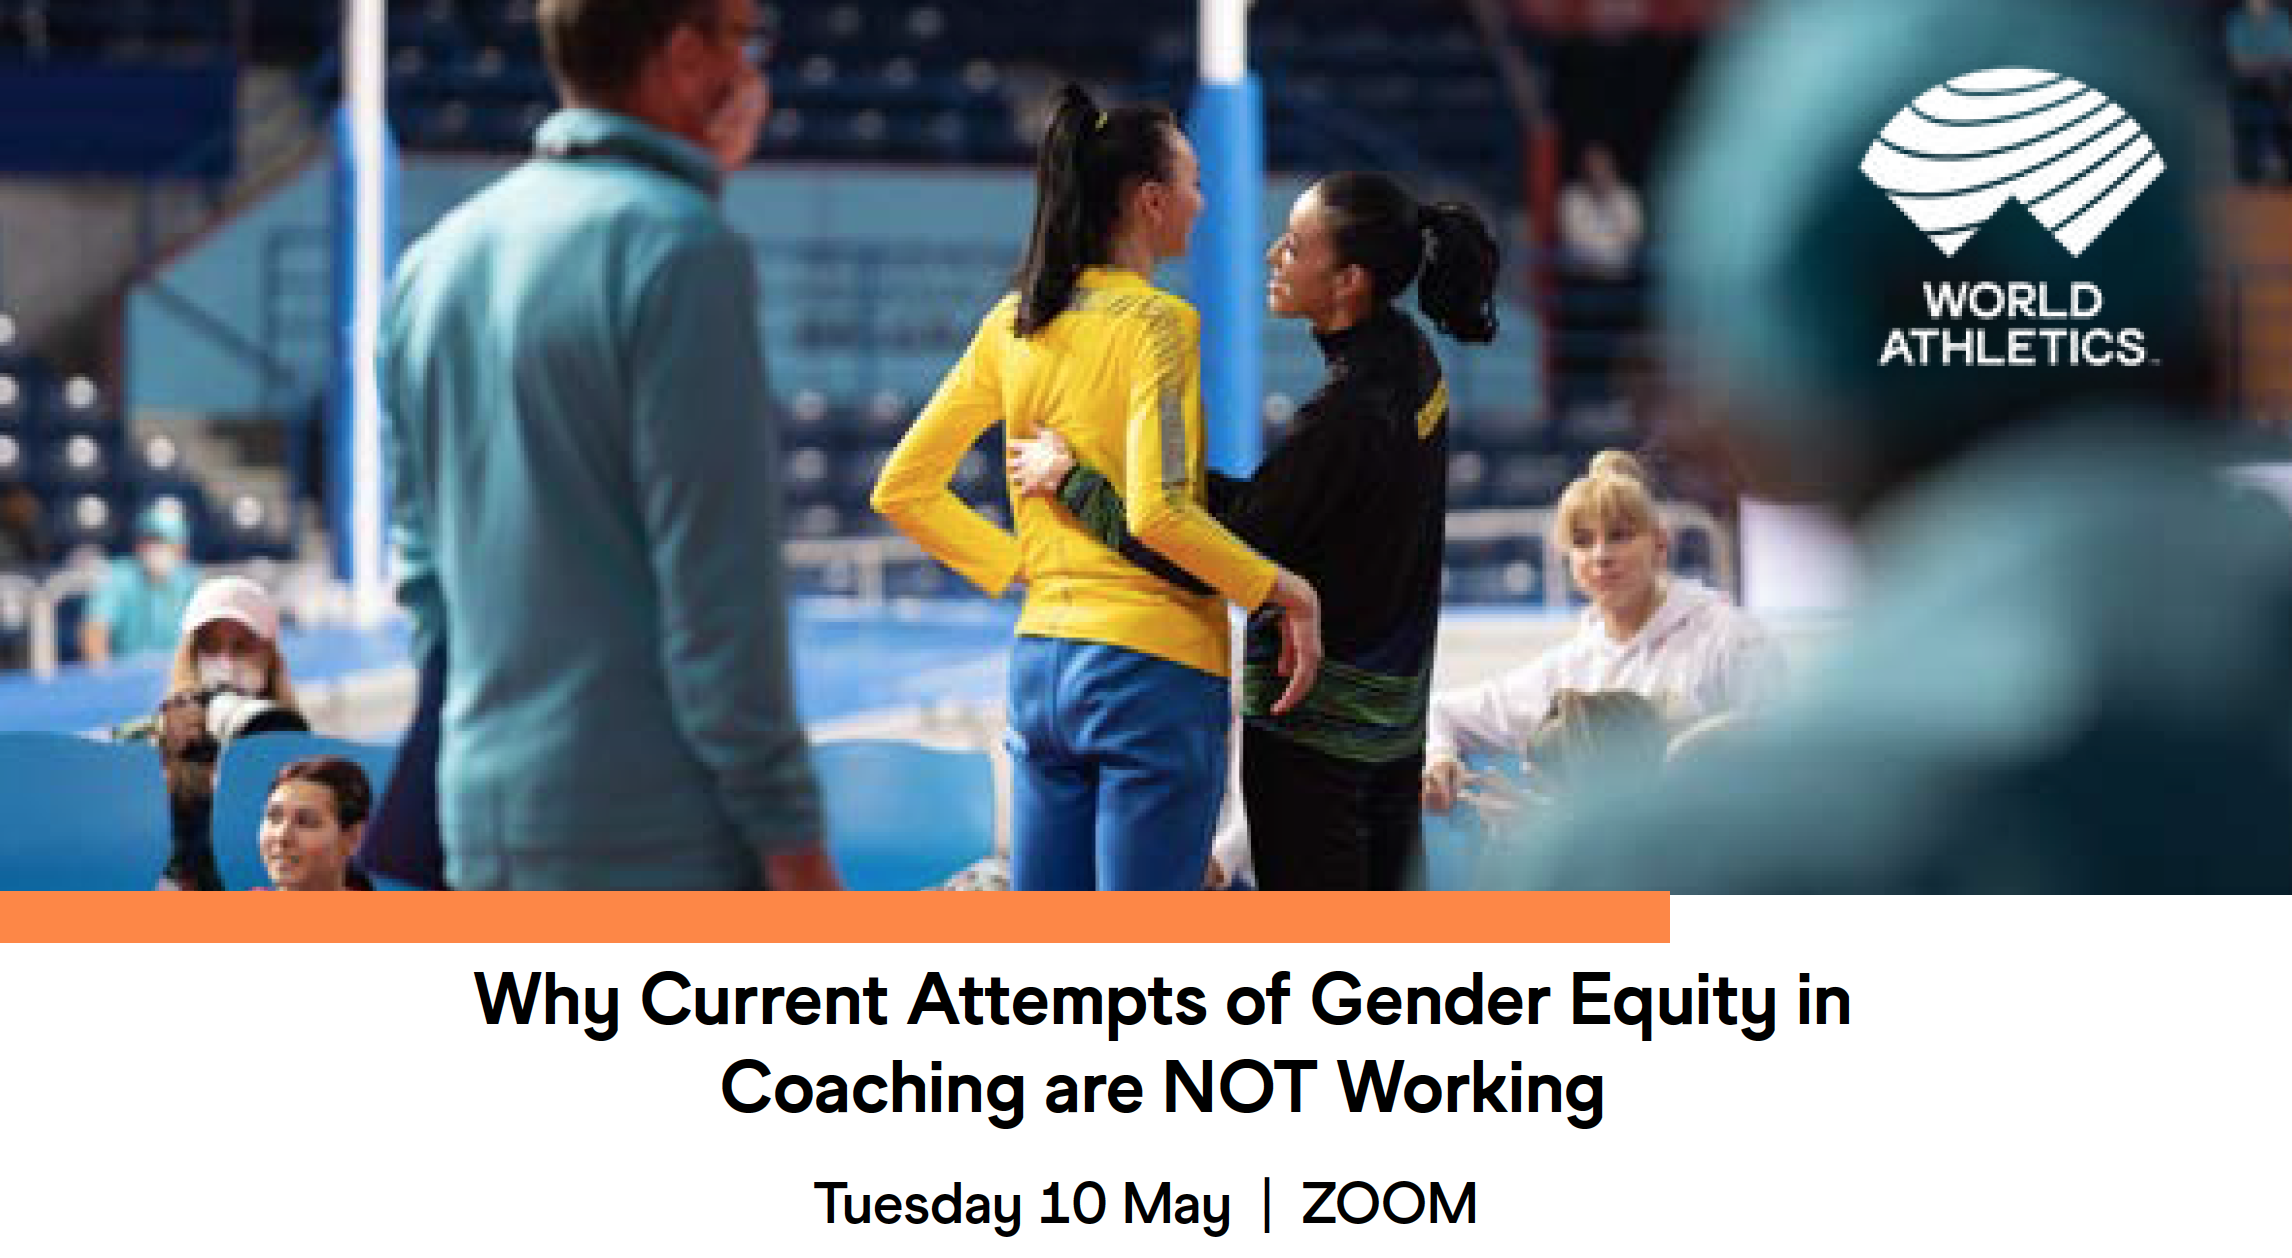 Gender Leadership Webinar Series: Why Current Attempts of Gender Equity in Coaching are NOT Working